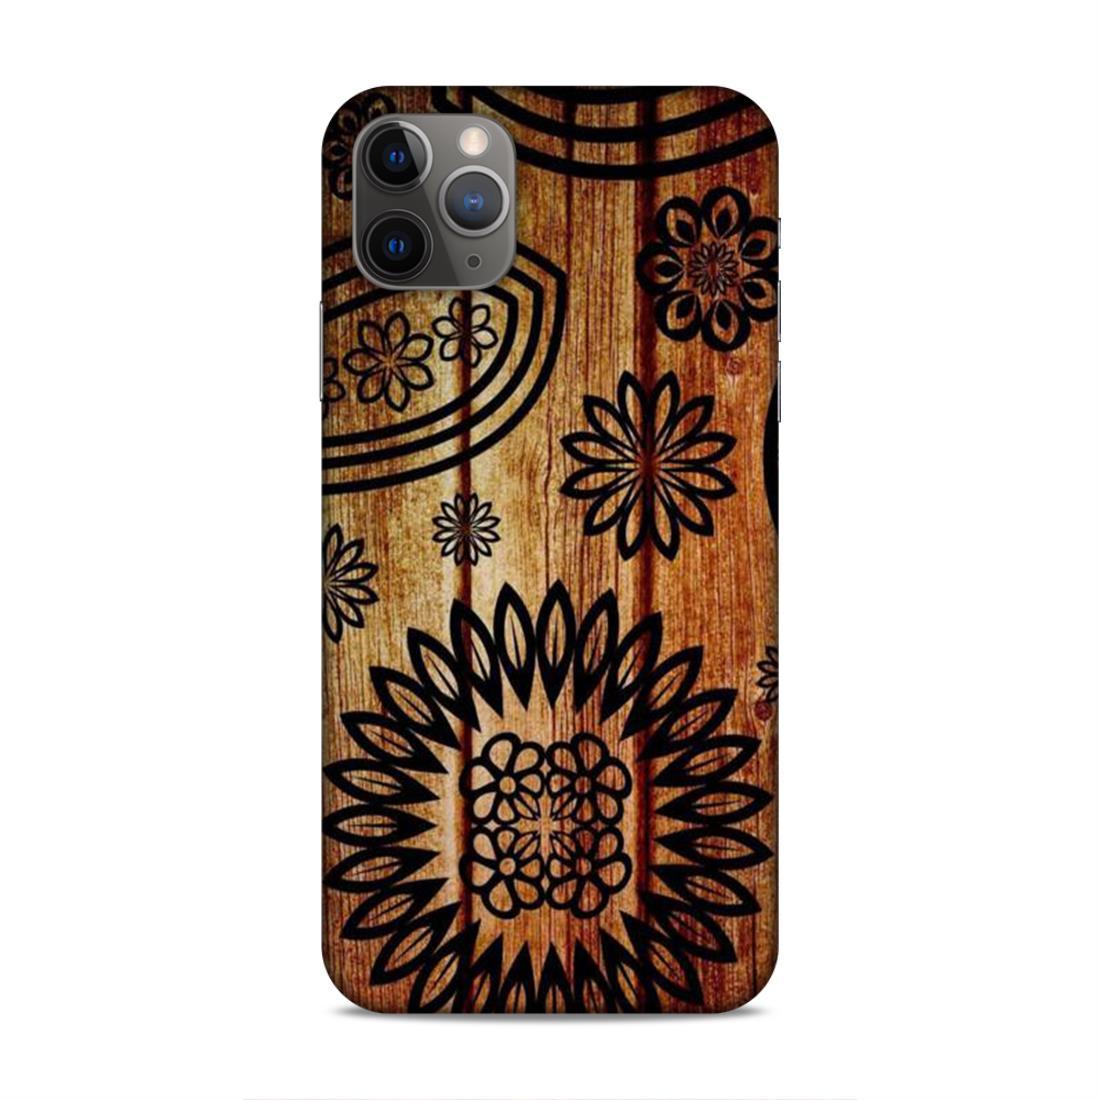 Wooden Look Pattern iPhone 11 Pro Max Mobile Case Cover